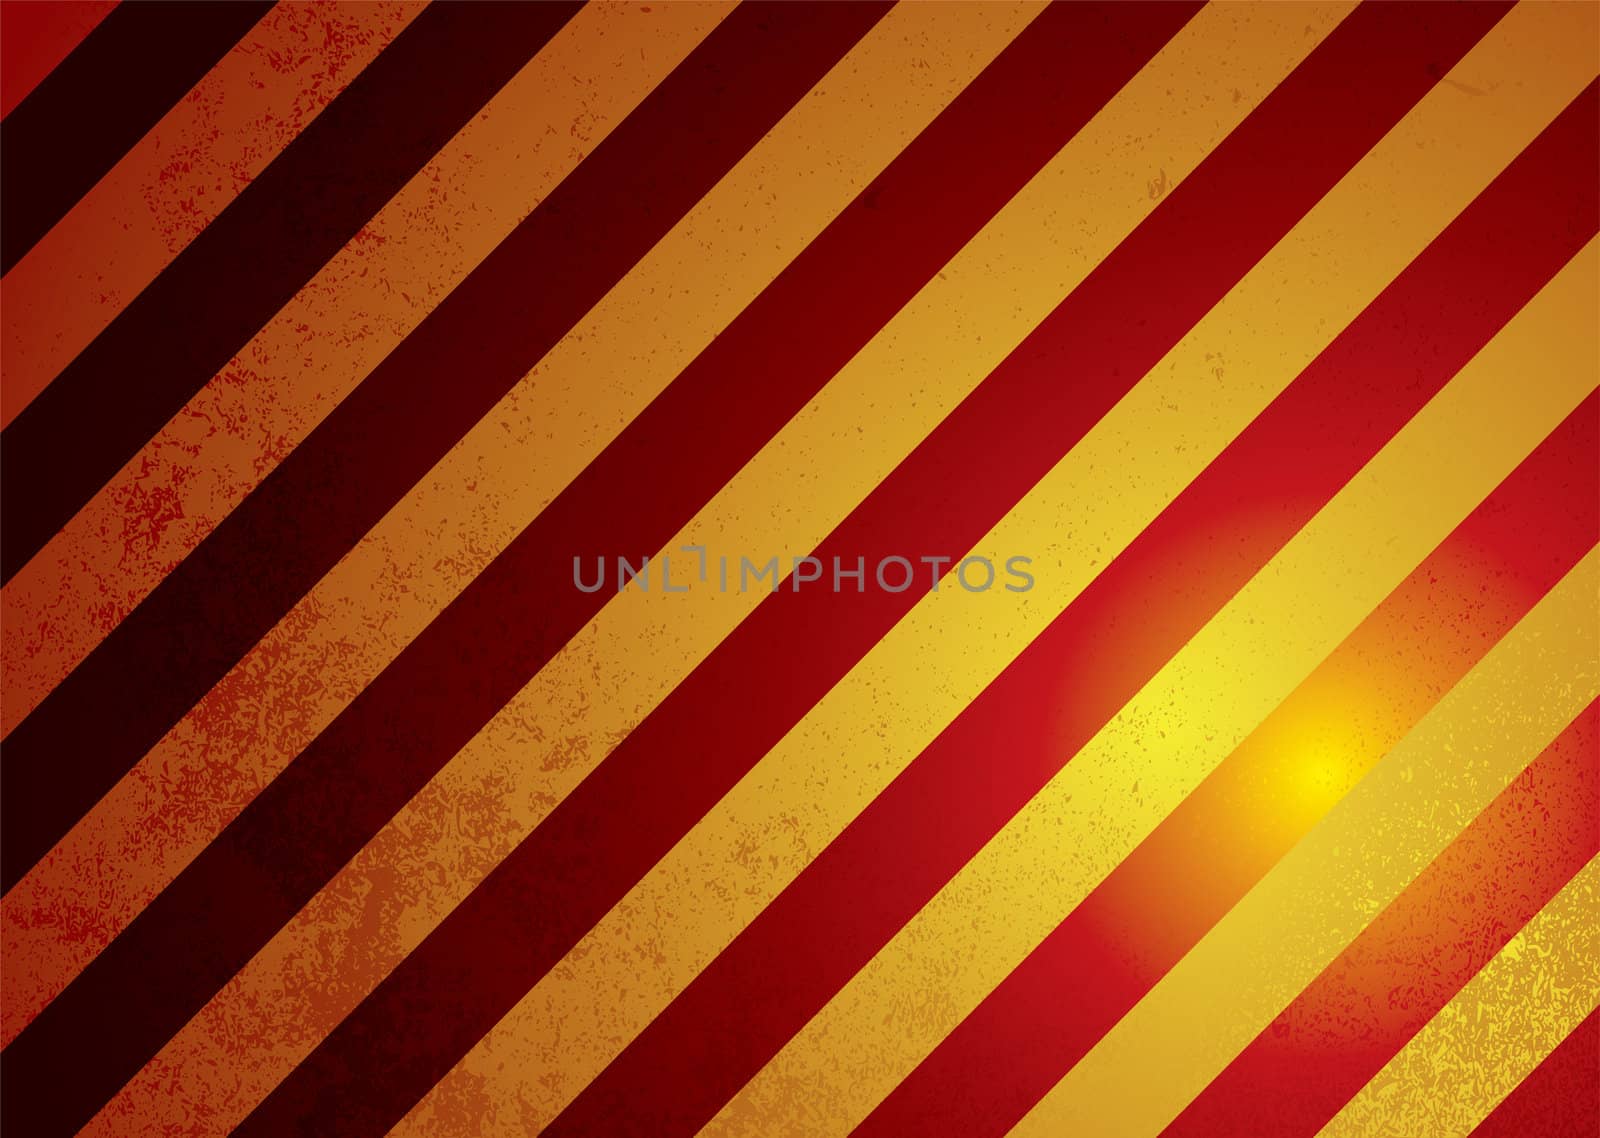 Modern realistic warning sign background in red and yellow